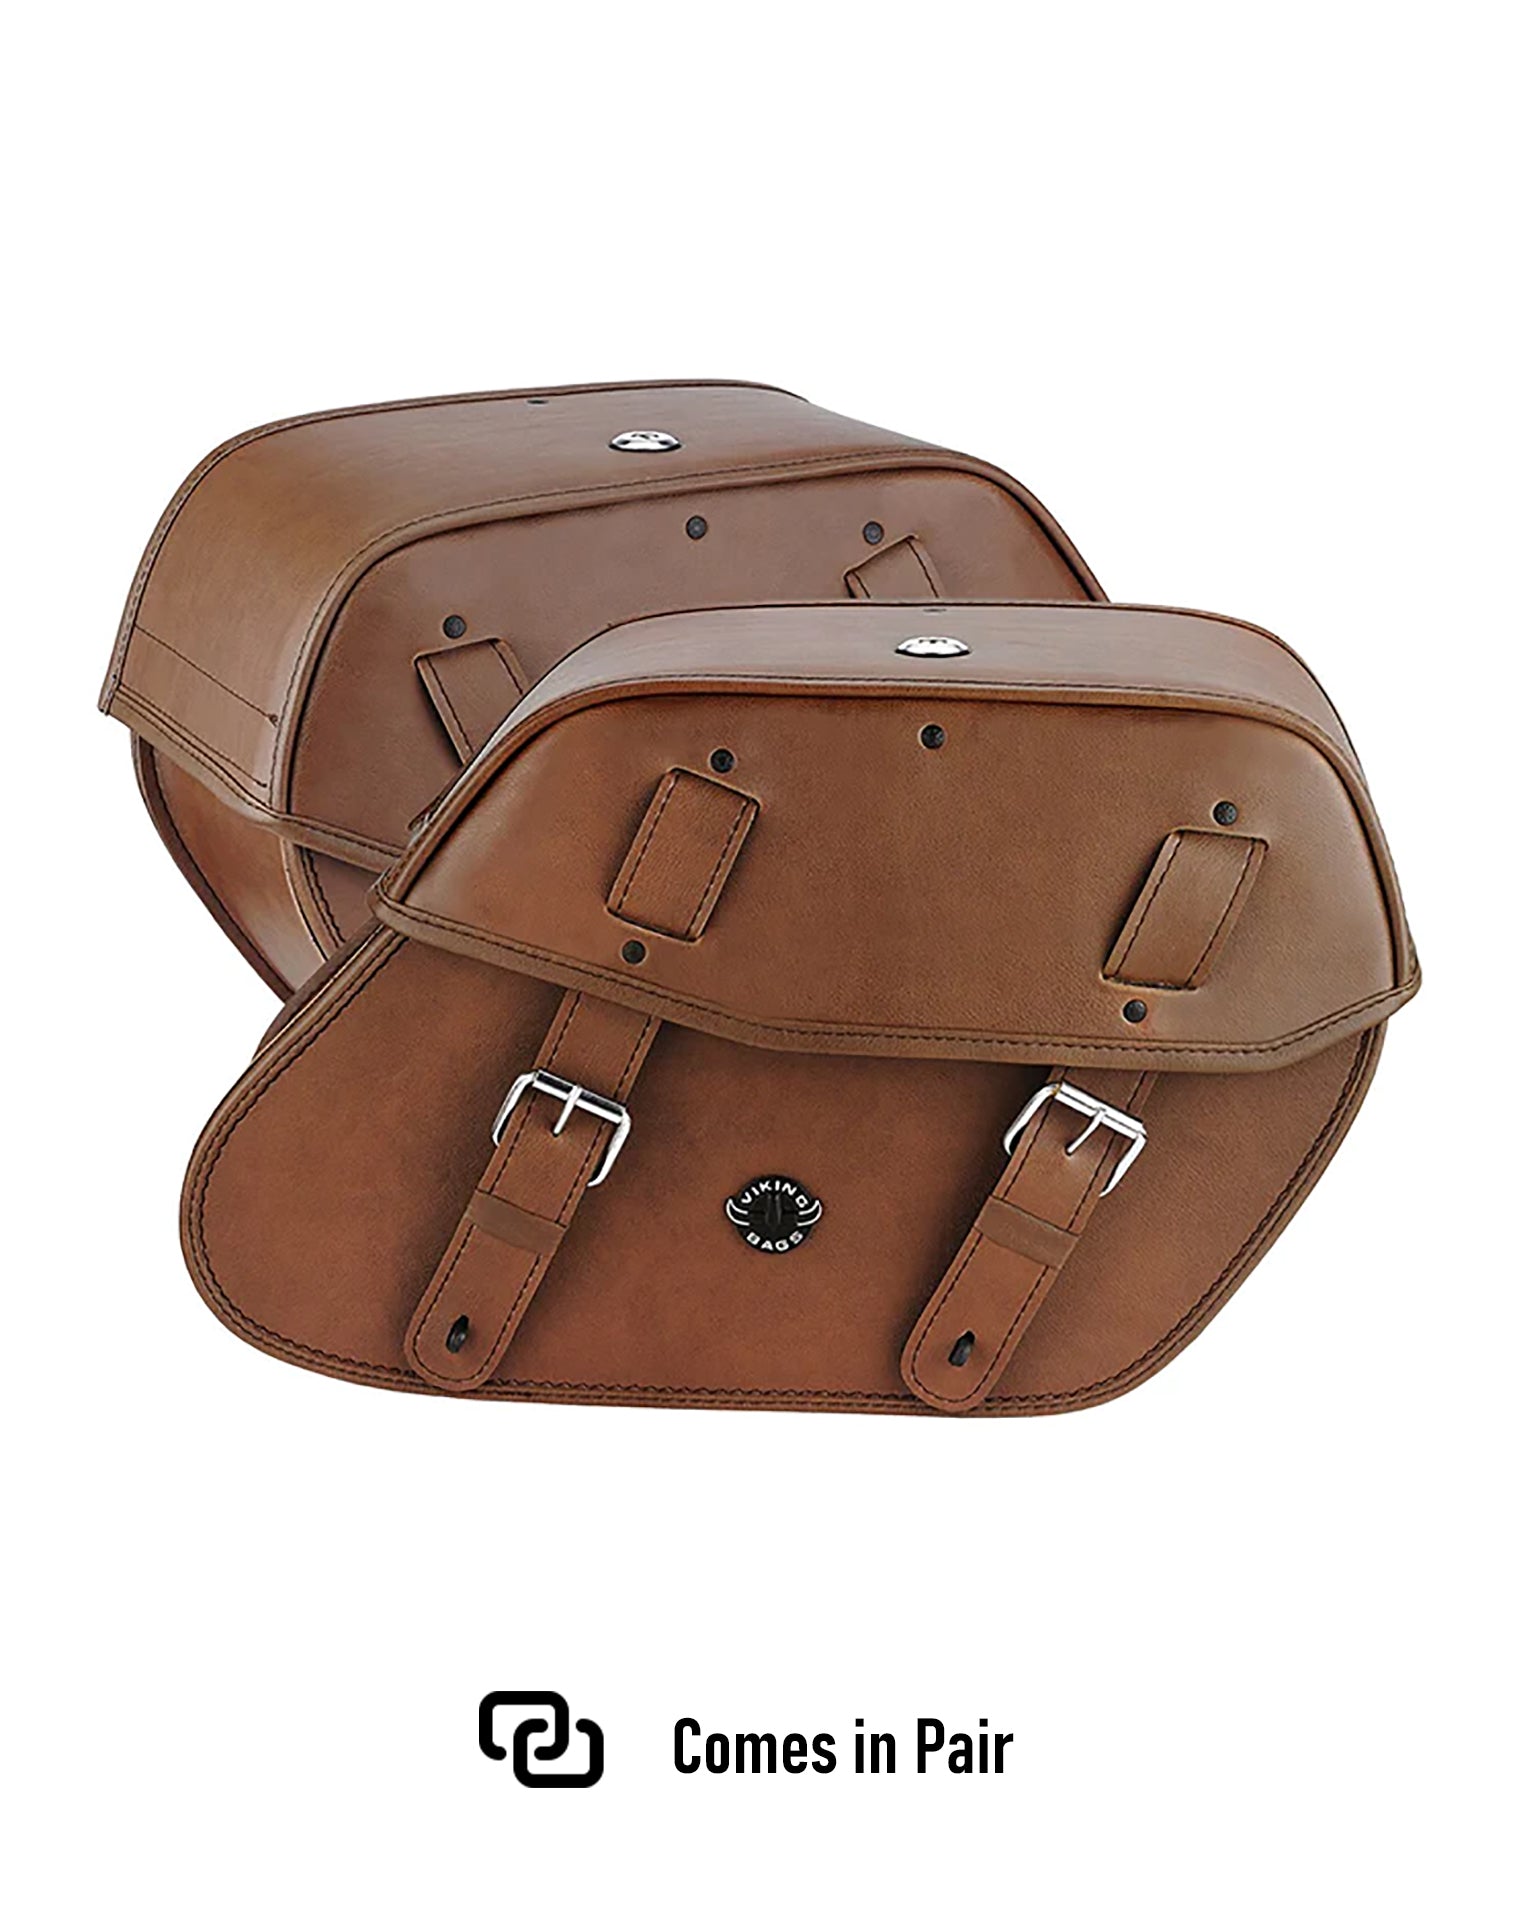 Viking Odin Brown Large Honda Vtx 1800 R Retro Leather Motorcycle Saddlebags Weather Resistant Bags Comes in Pair